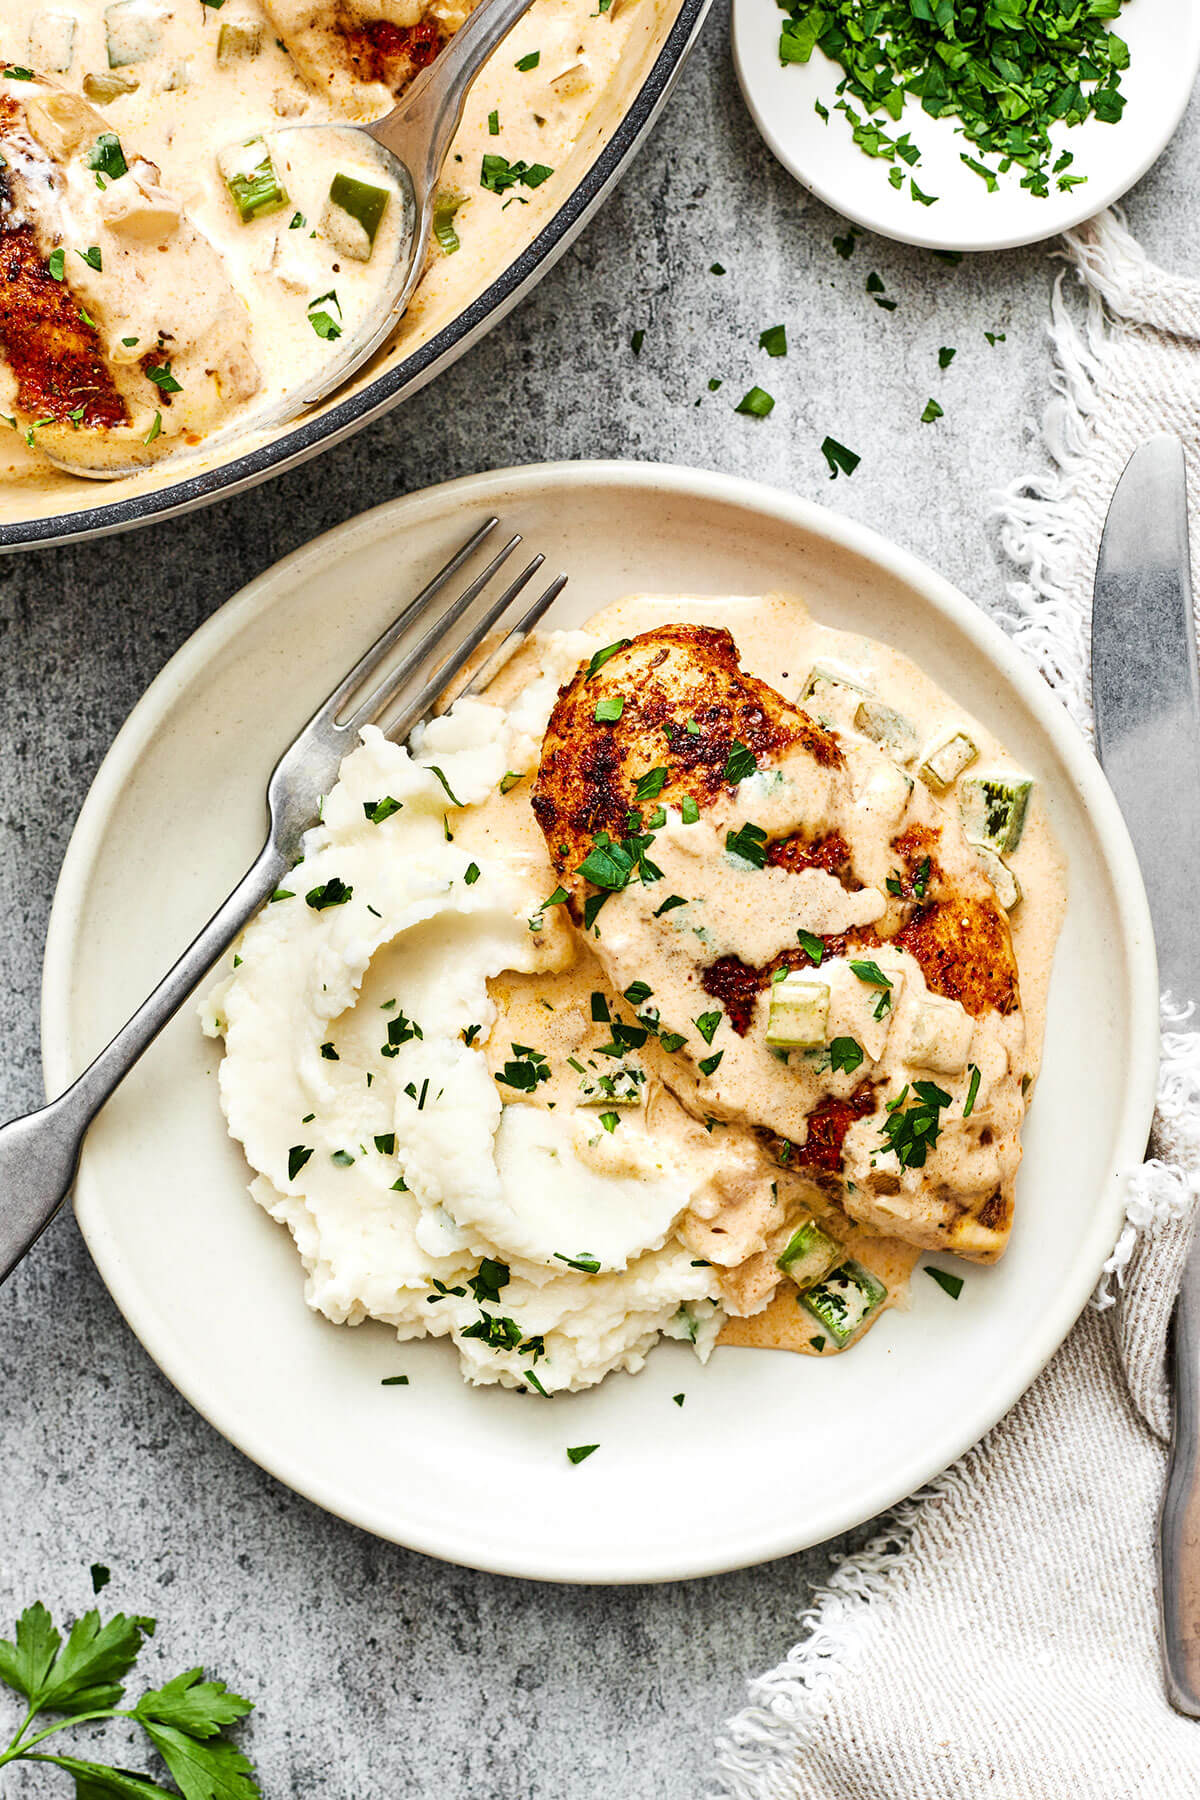 Cajun chicken with mashed potatoes